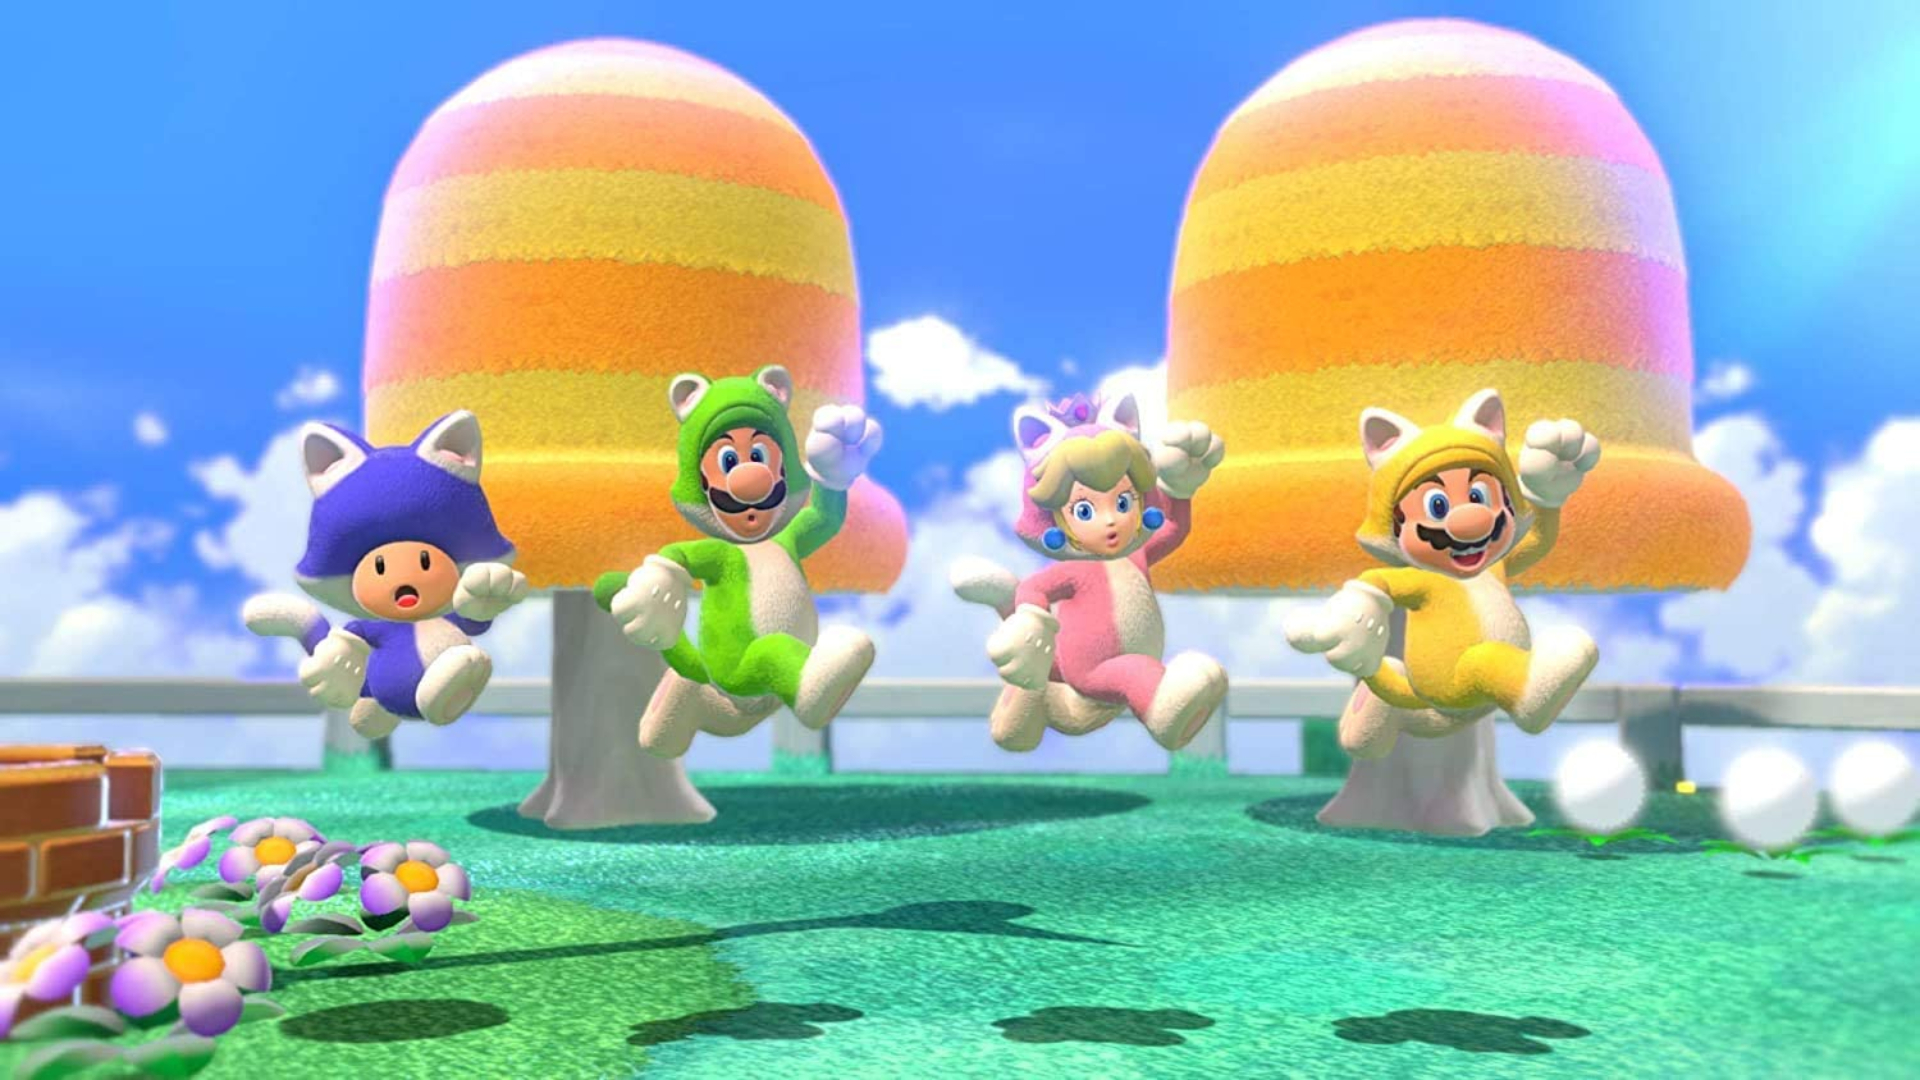 four Mario characters dressed as cats